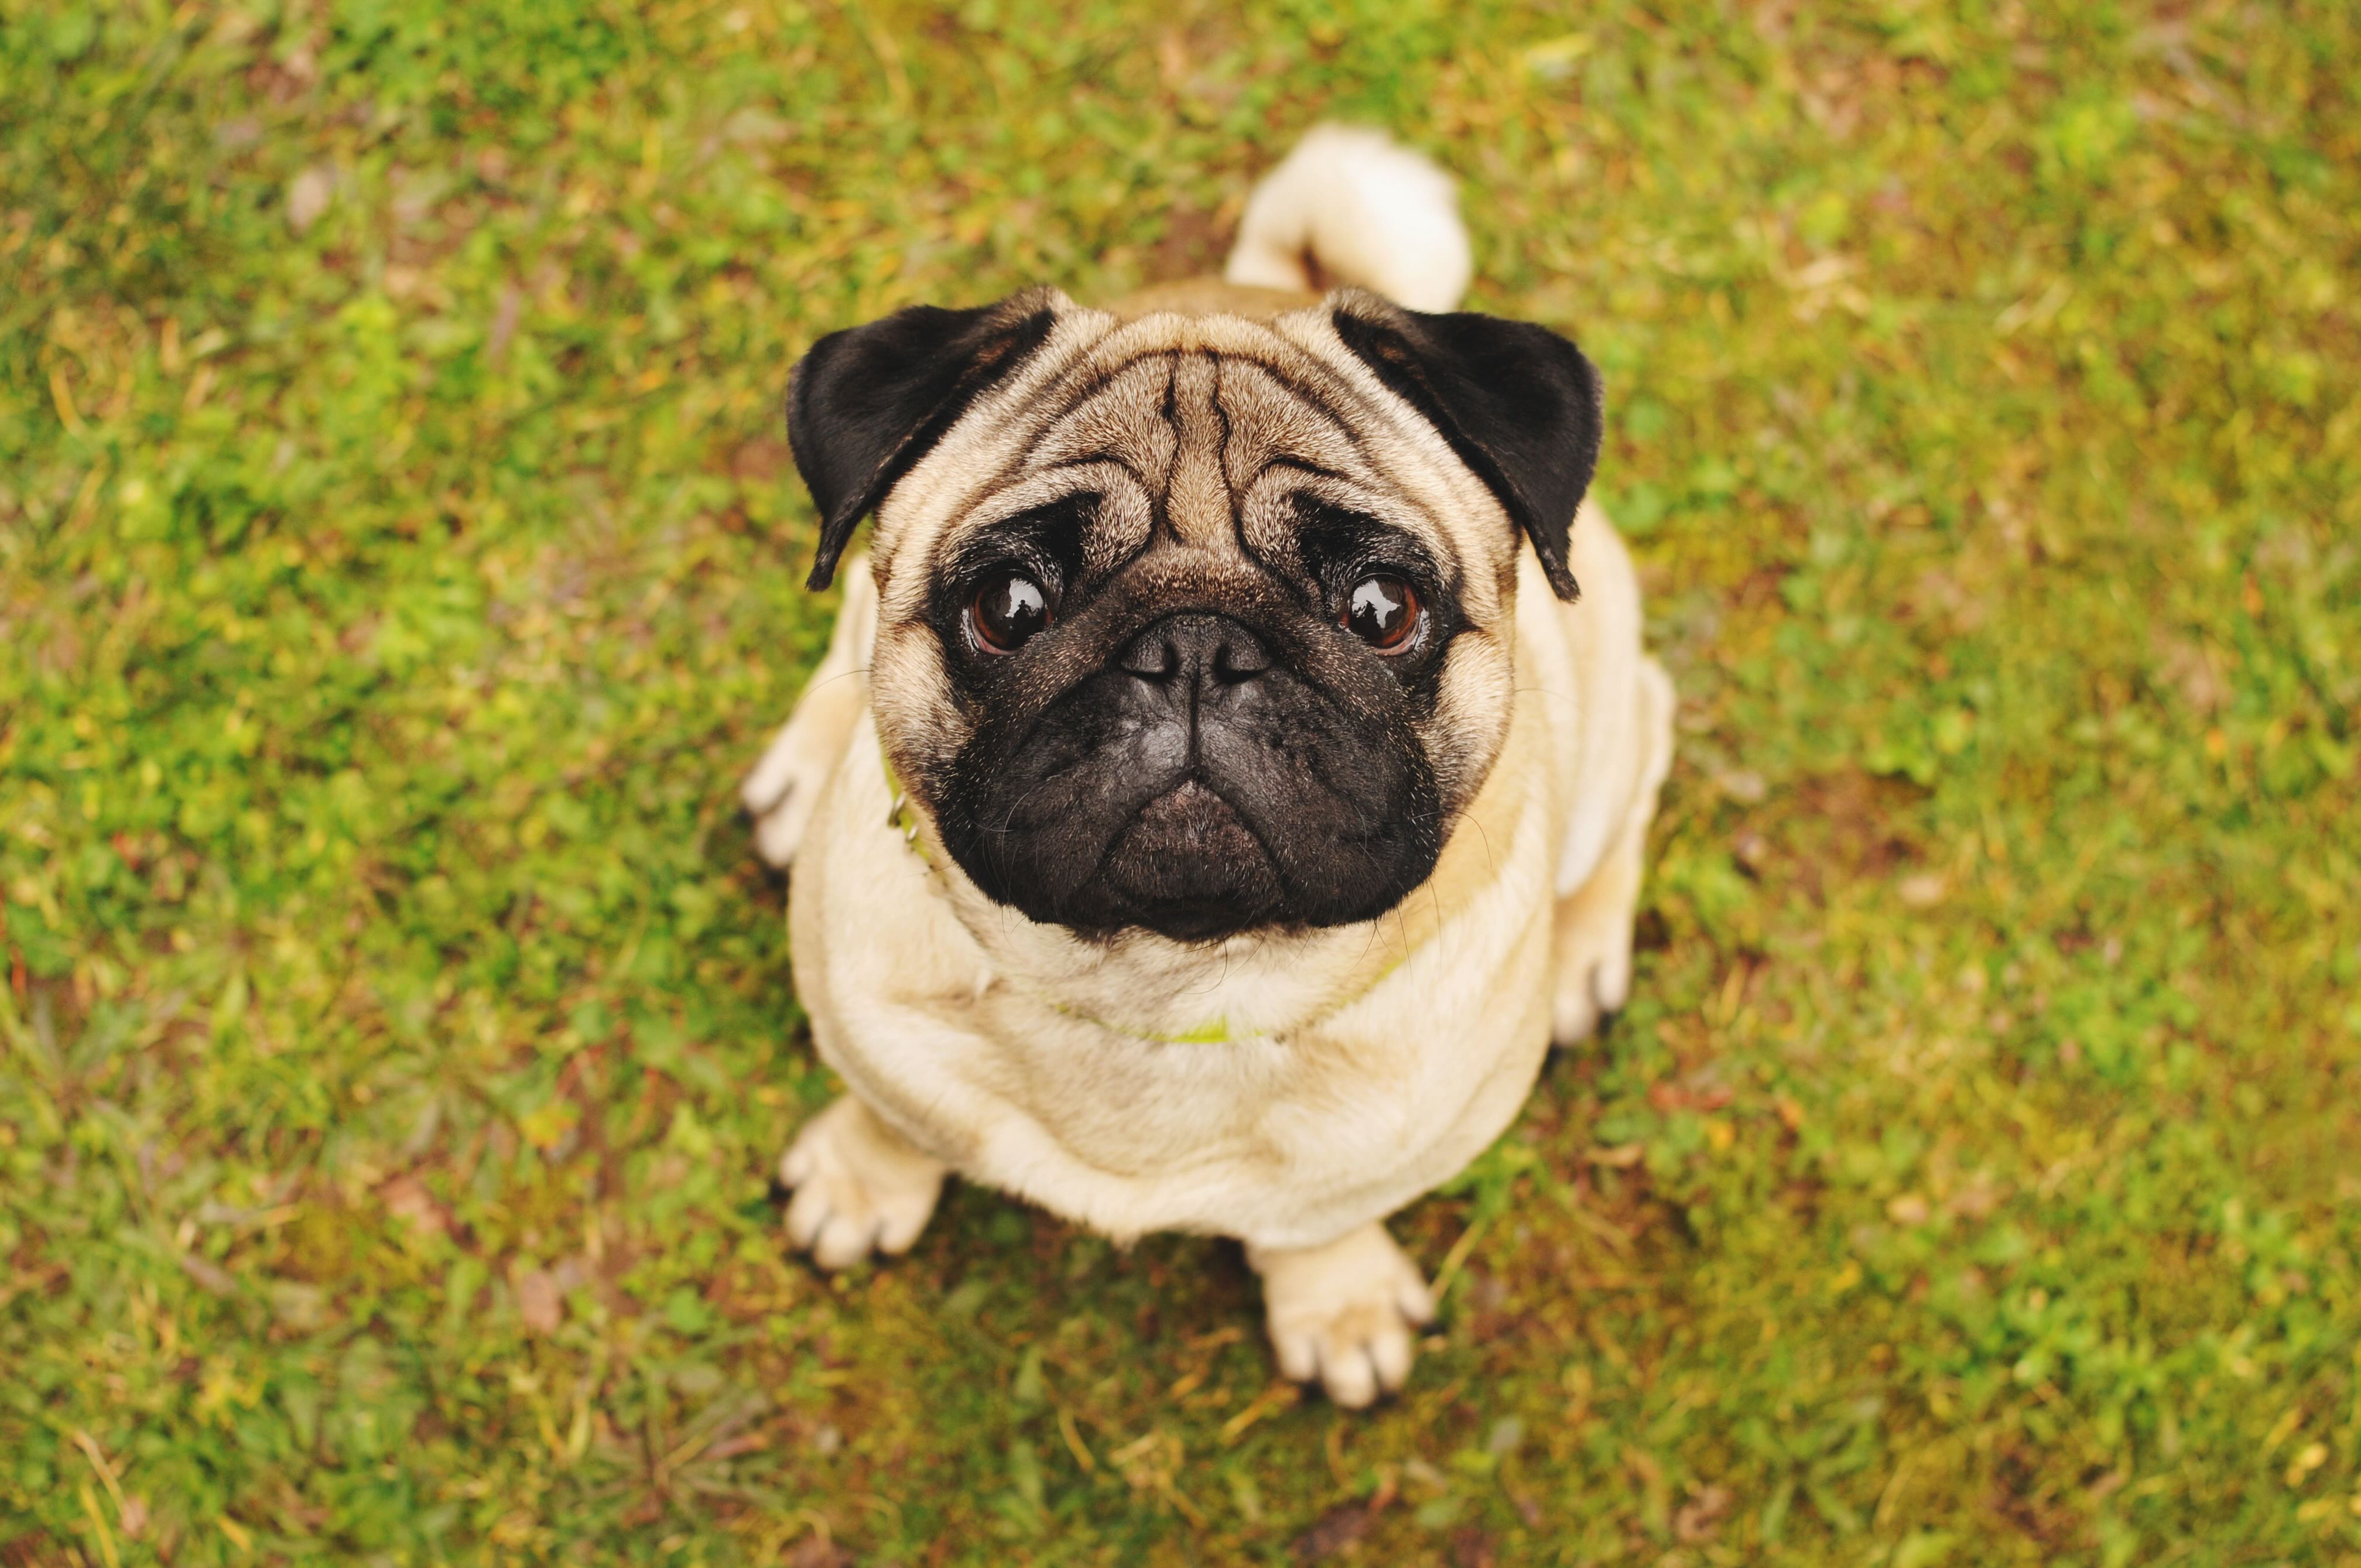 fawn pug sitting in grass and looking straight up at the camera